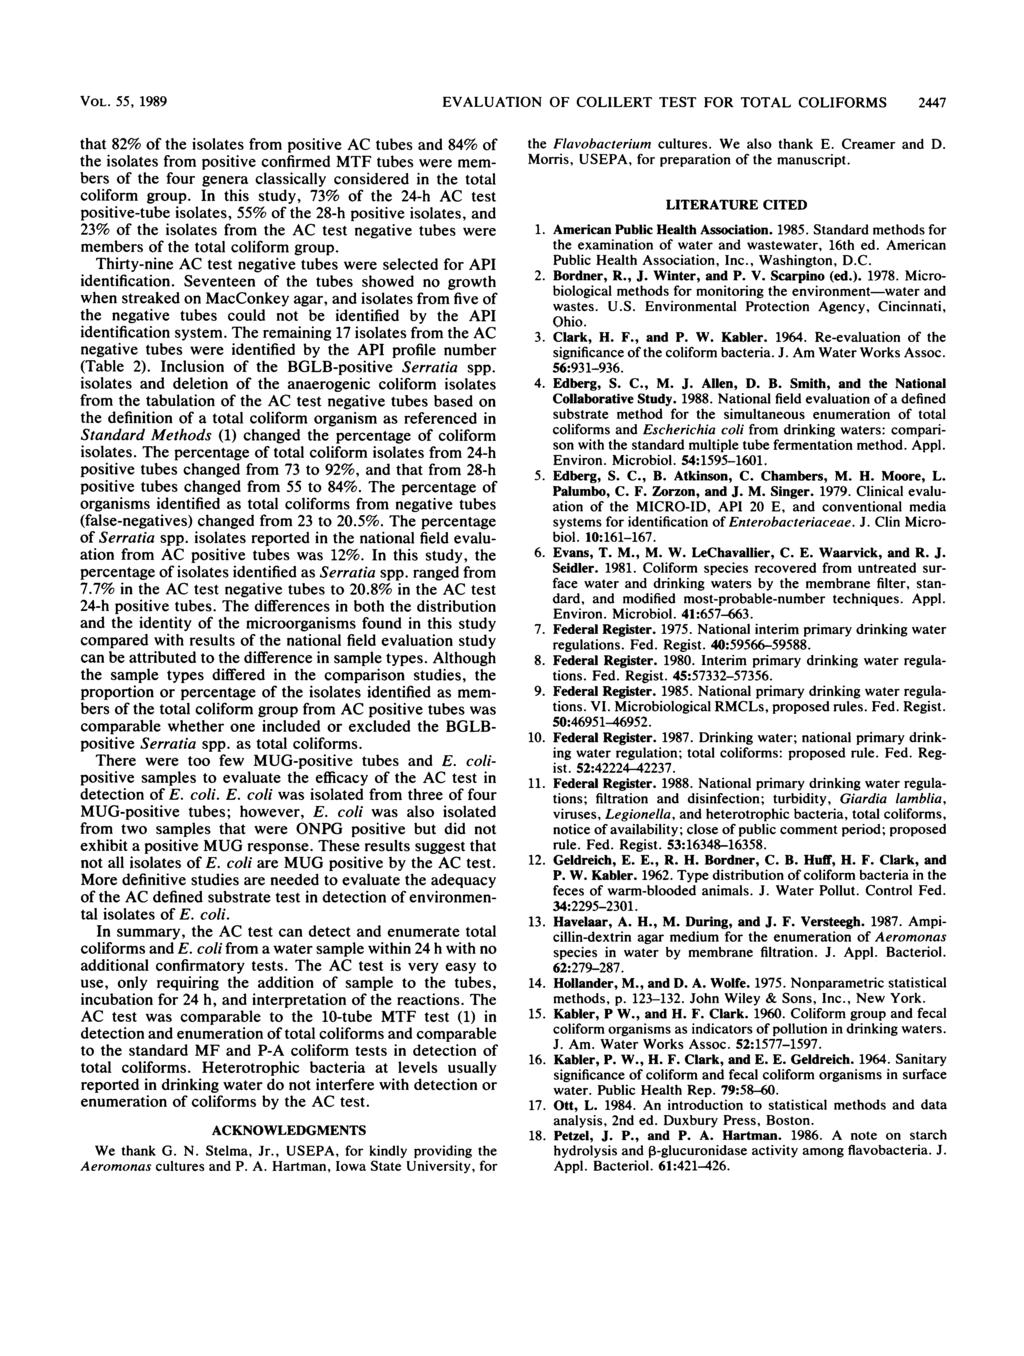 VOL. 55, 1989 EVALUATION OF COLILERT TEST FOR TOTAL COLIFORMS 2447 that 82% of the isolates from positive AC tubes and 84% of the isolates from positive confirmed MTF tubes were members of the four